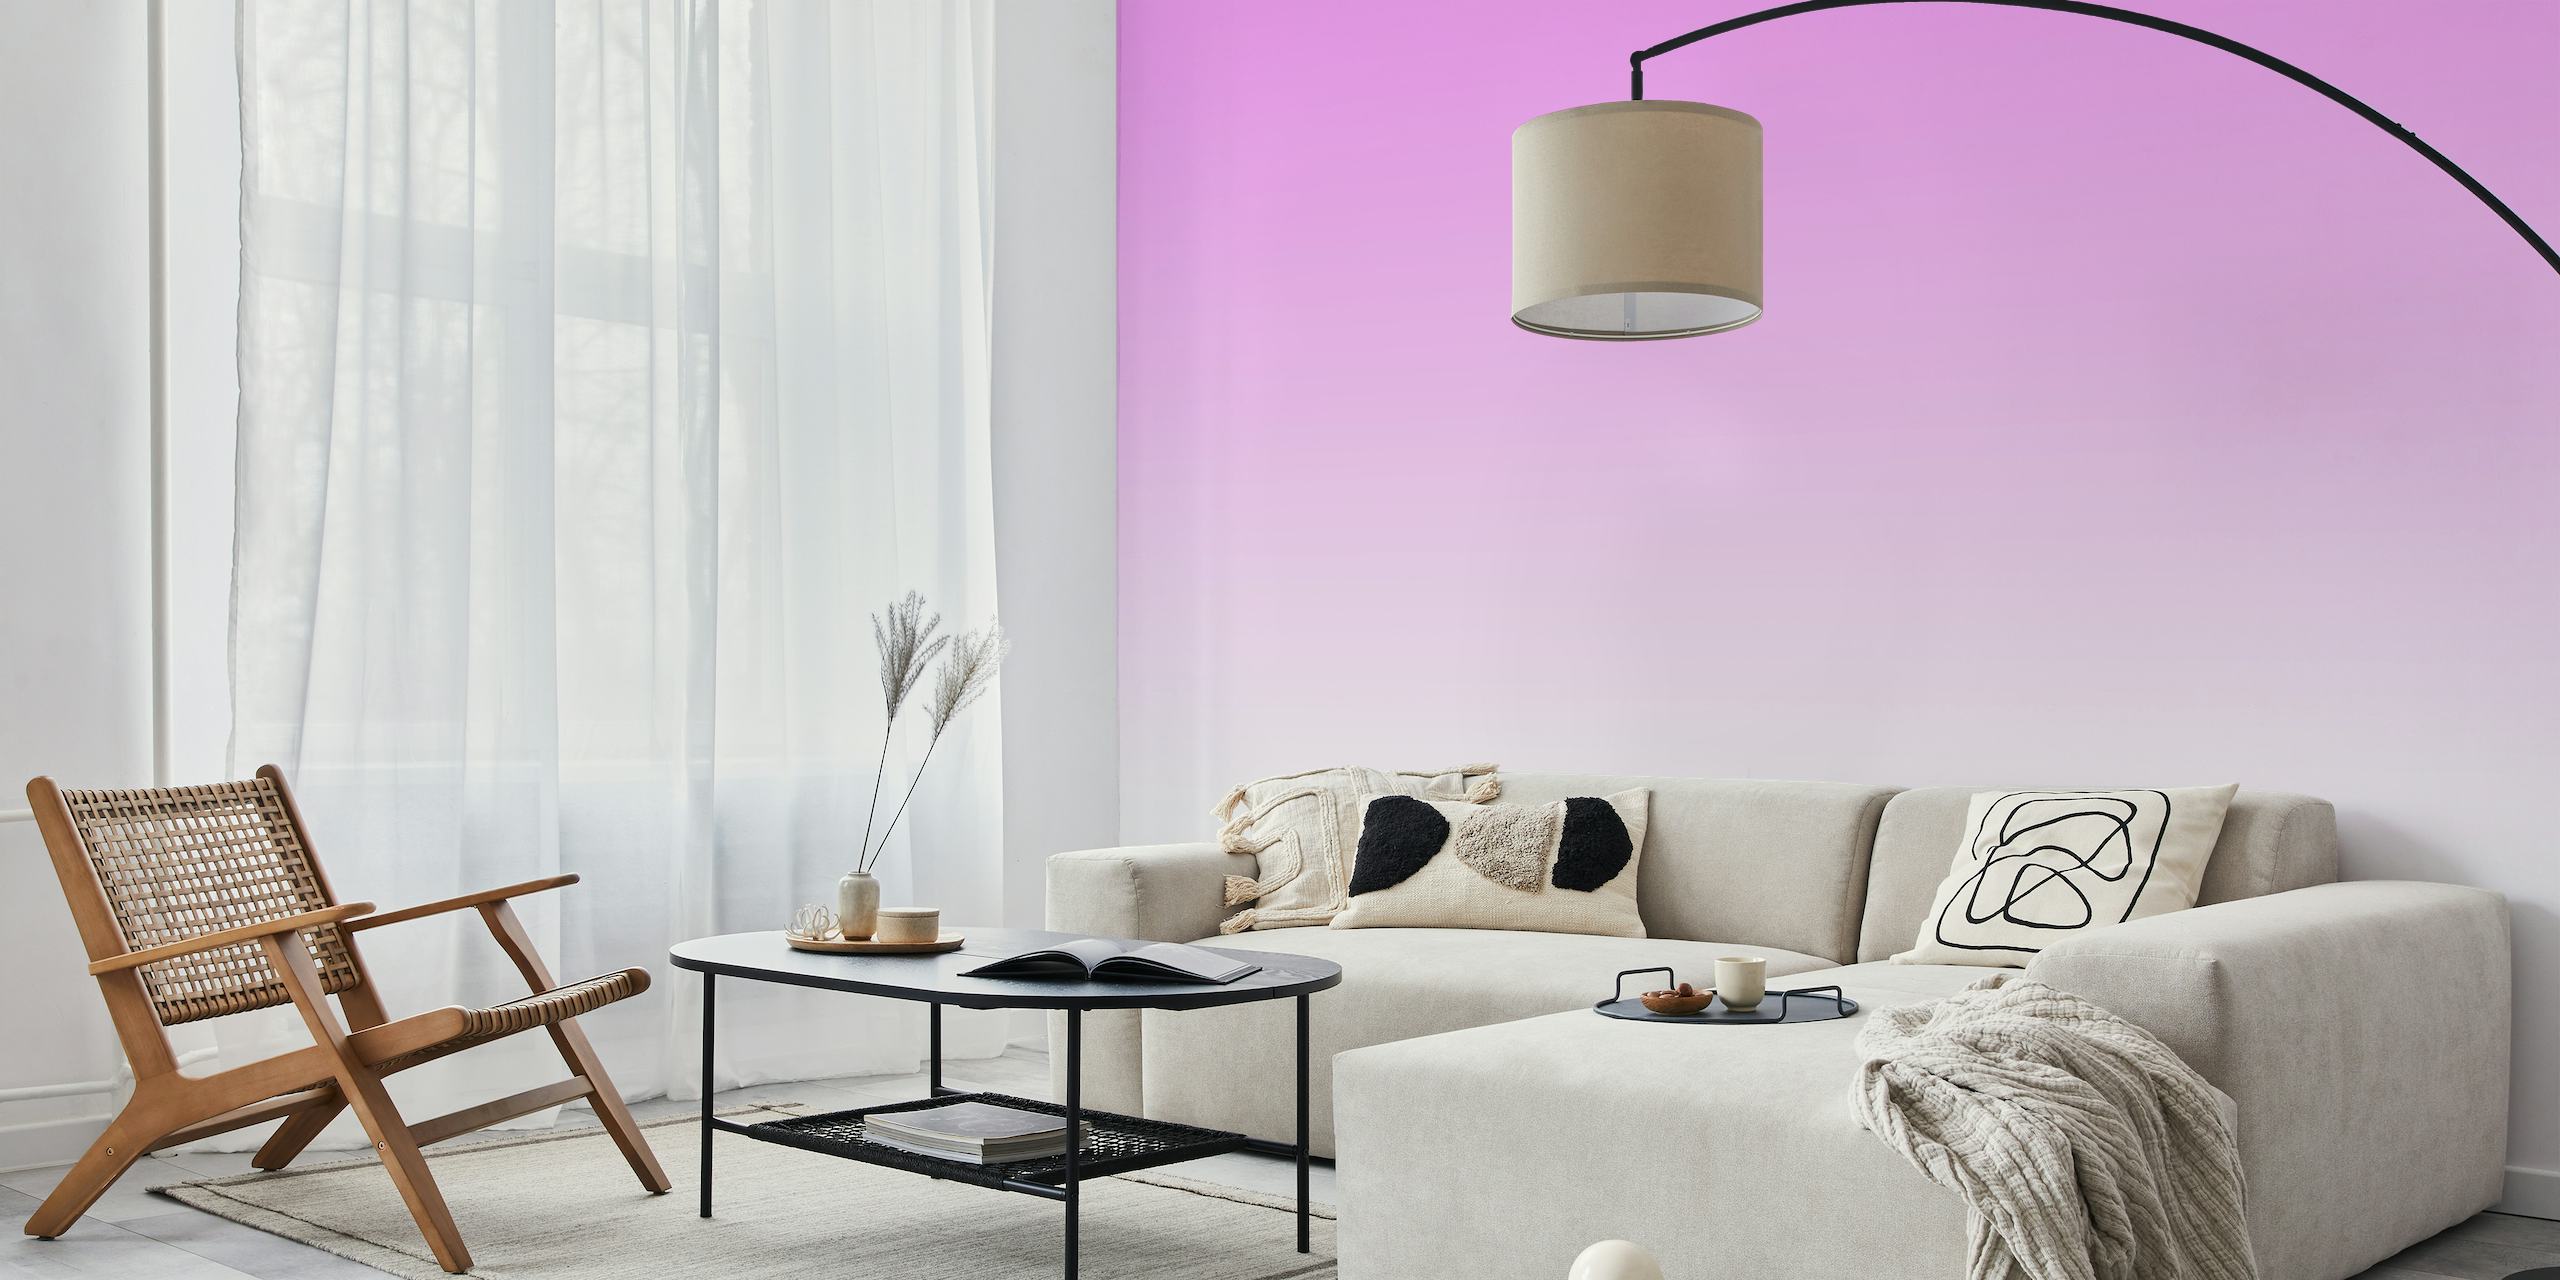 Soft lavender to pink gradient wall mural